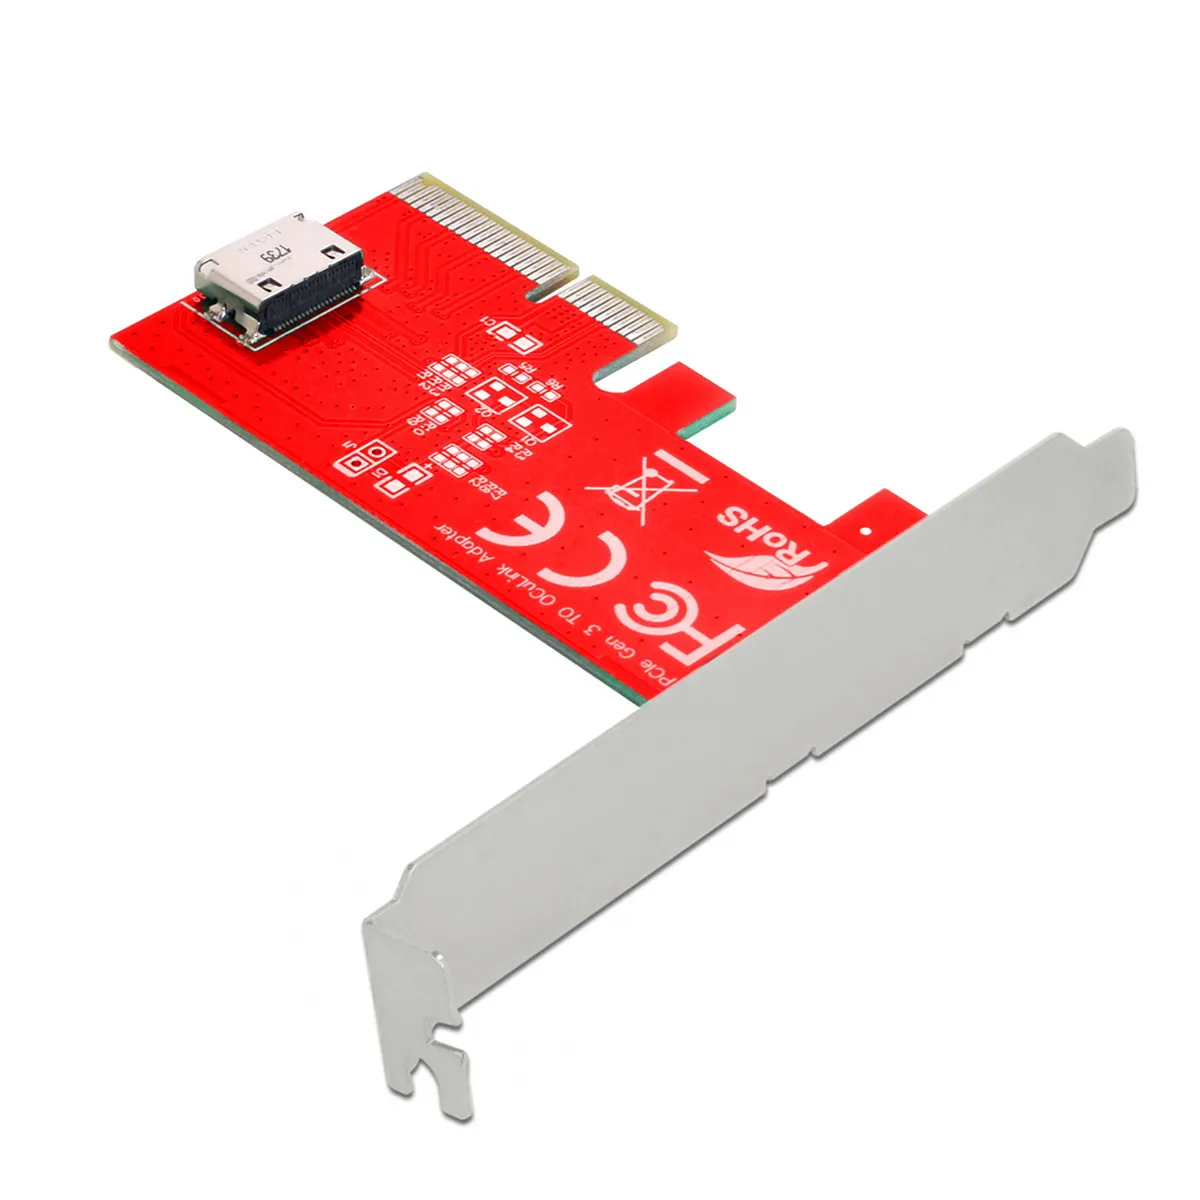 

CYDZ PCI-E 3.0 x4 Express 4.0 to Oculink Internal SFF-8612 SFF-8611 Host Adapter for PCIe SSD with Bracket